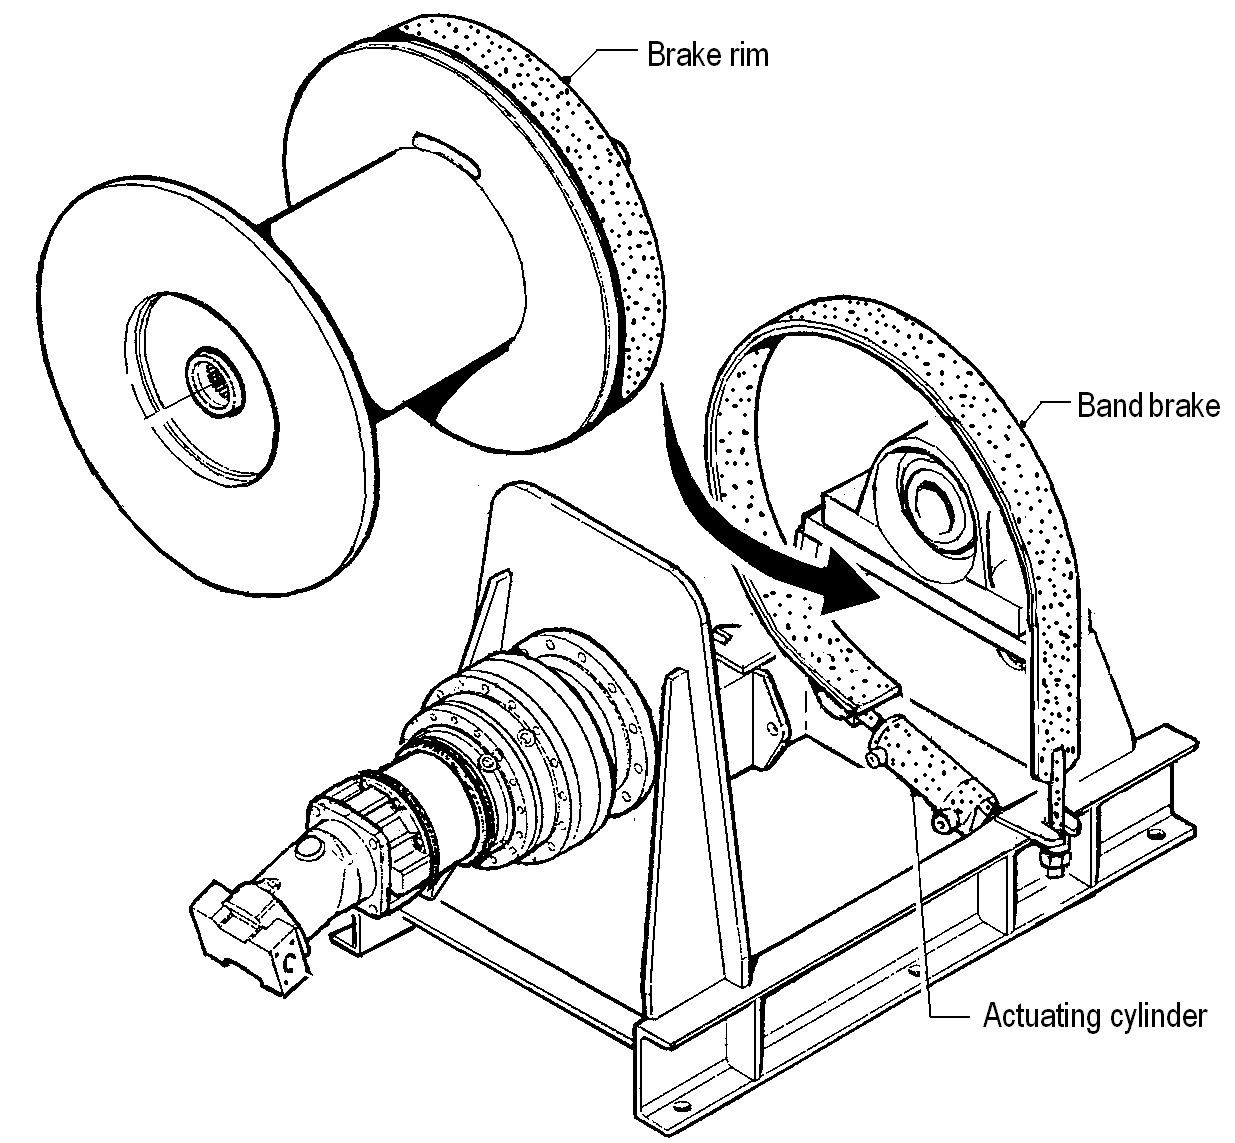 About winches figure 14 - Typical automatic bandbrake (hydraulically actuated)